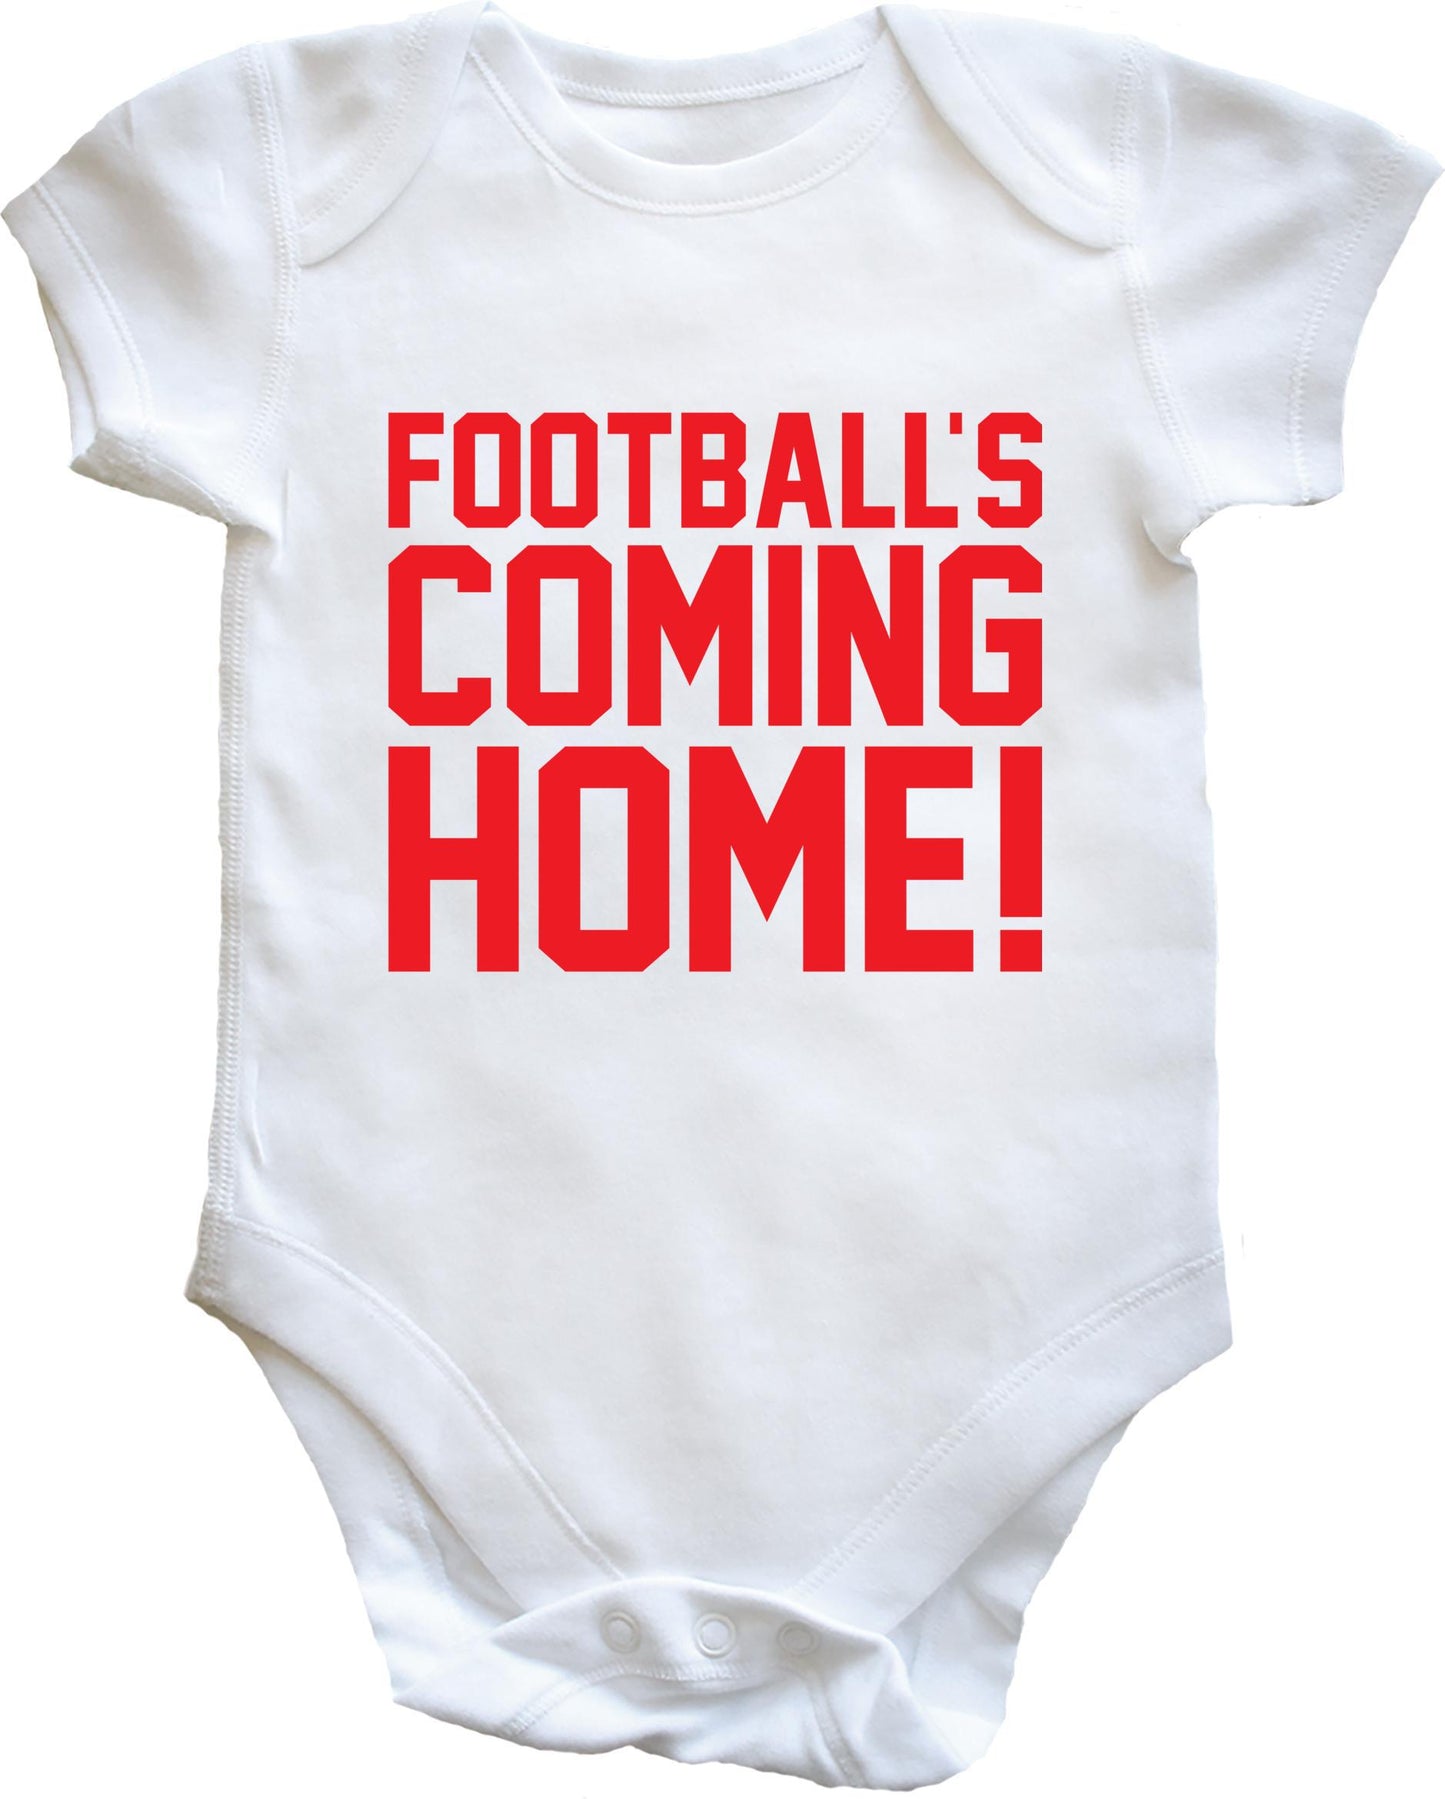 Footballs coming home England baby vest